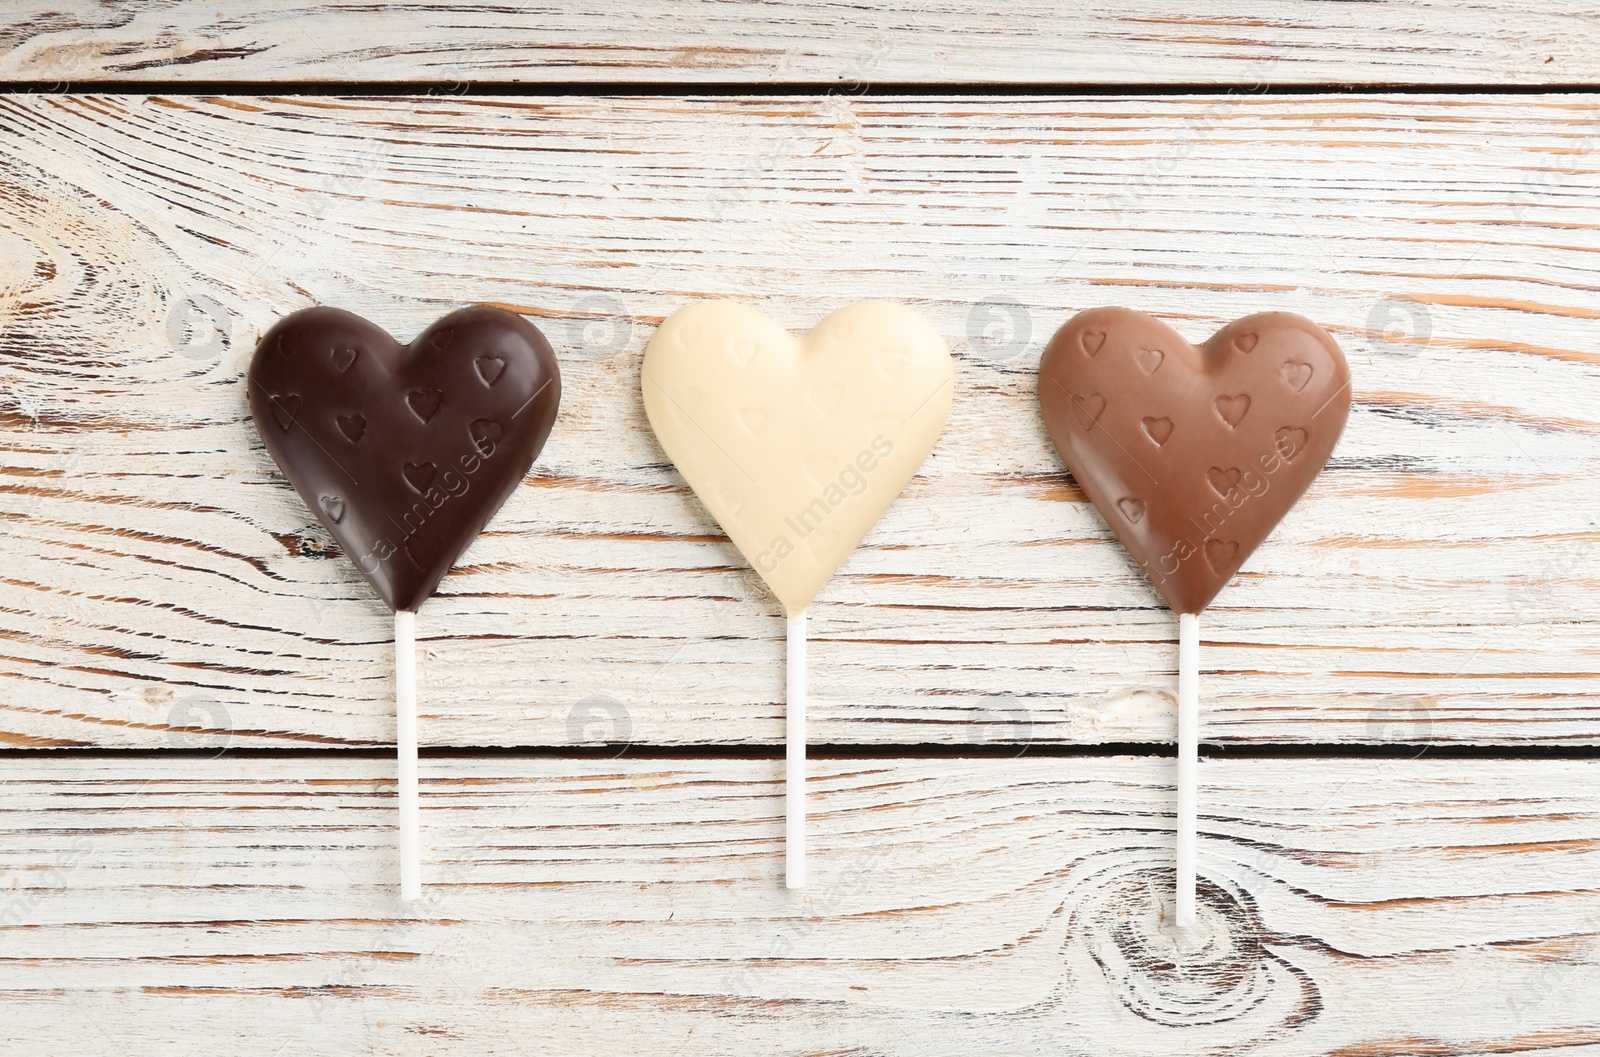 Photo of Different chocolate heart shaped lollipops on white wooden table, flat lay